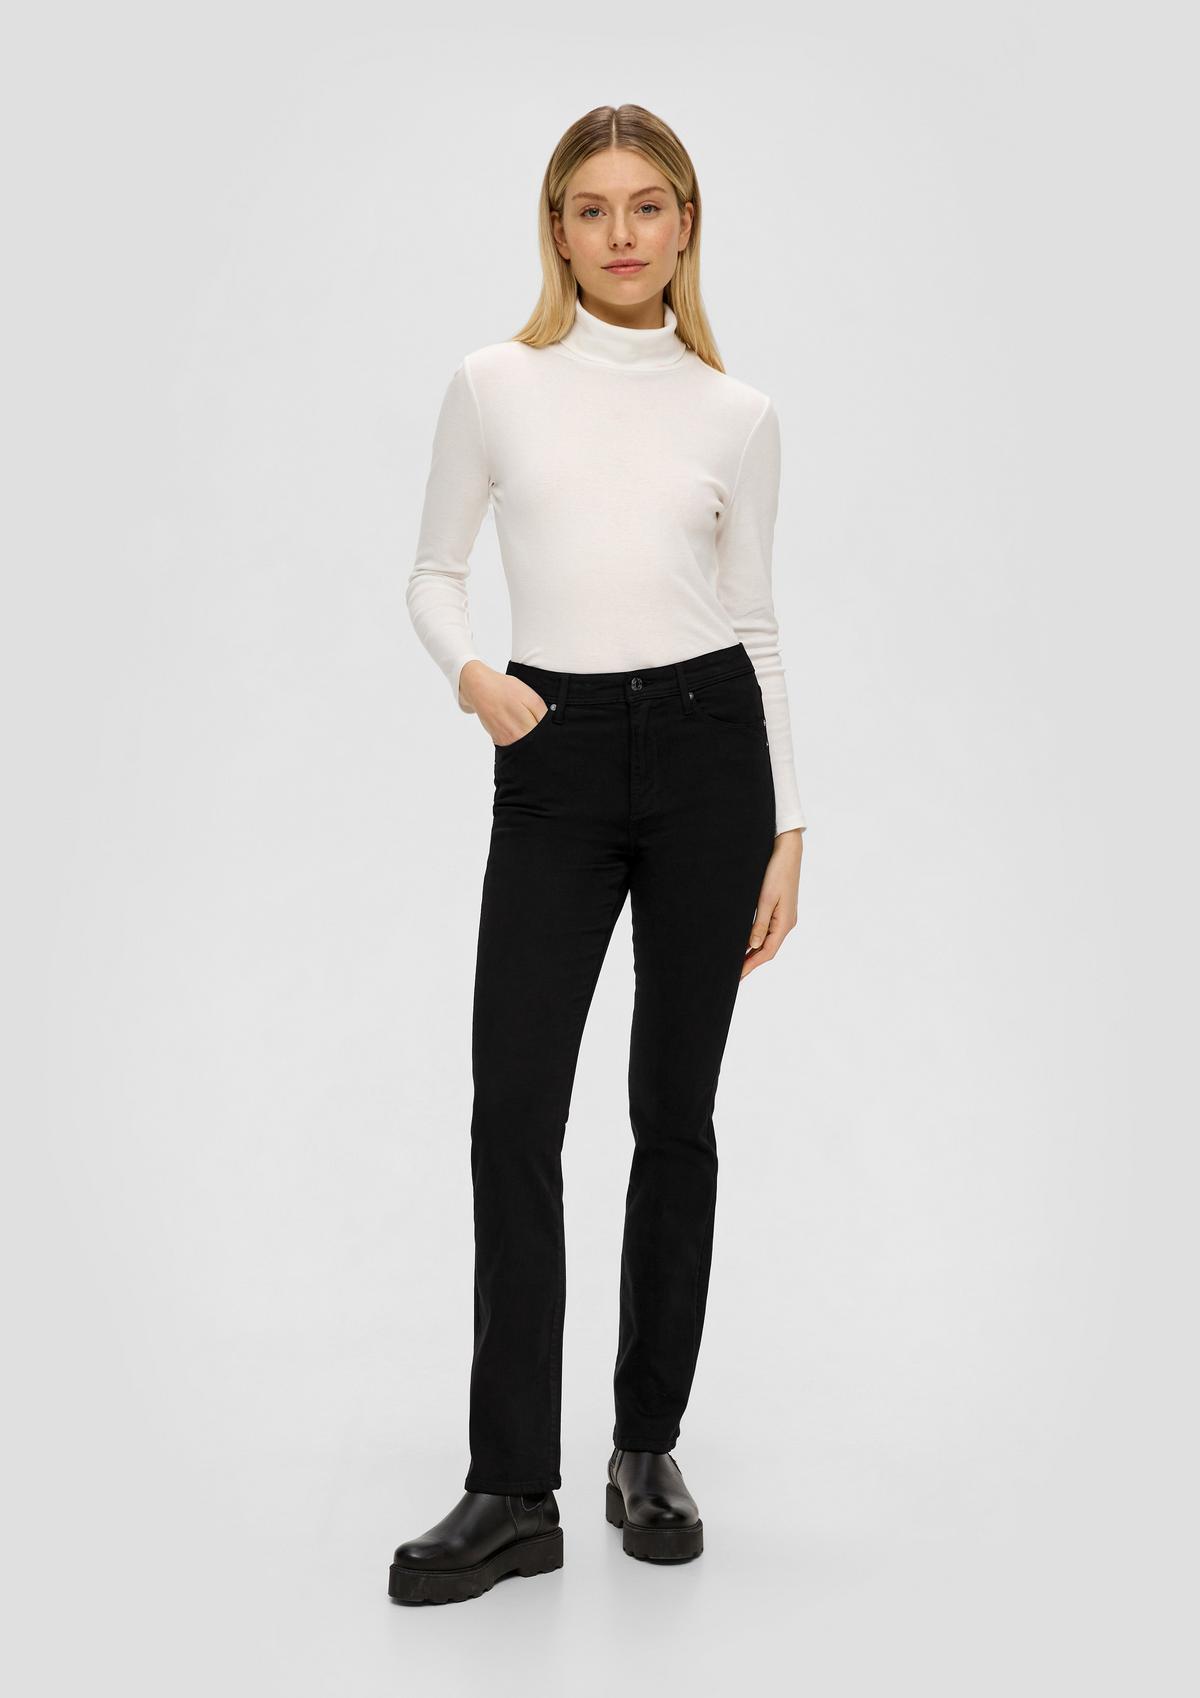 Slim fit Betsy jeans / mid rise / bootcut leg